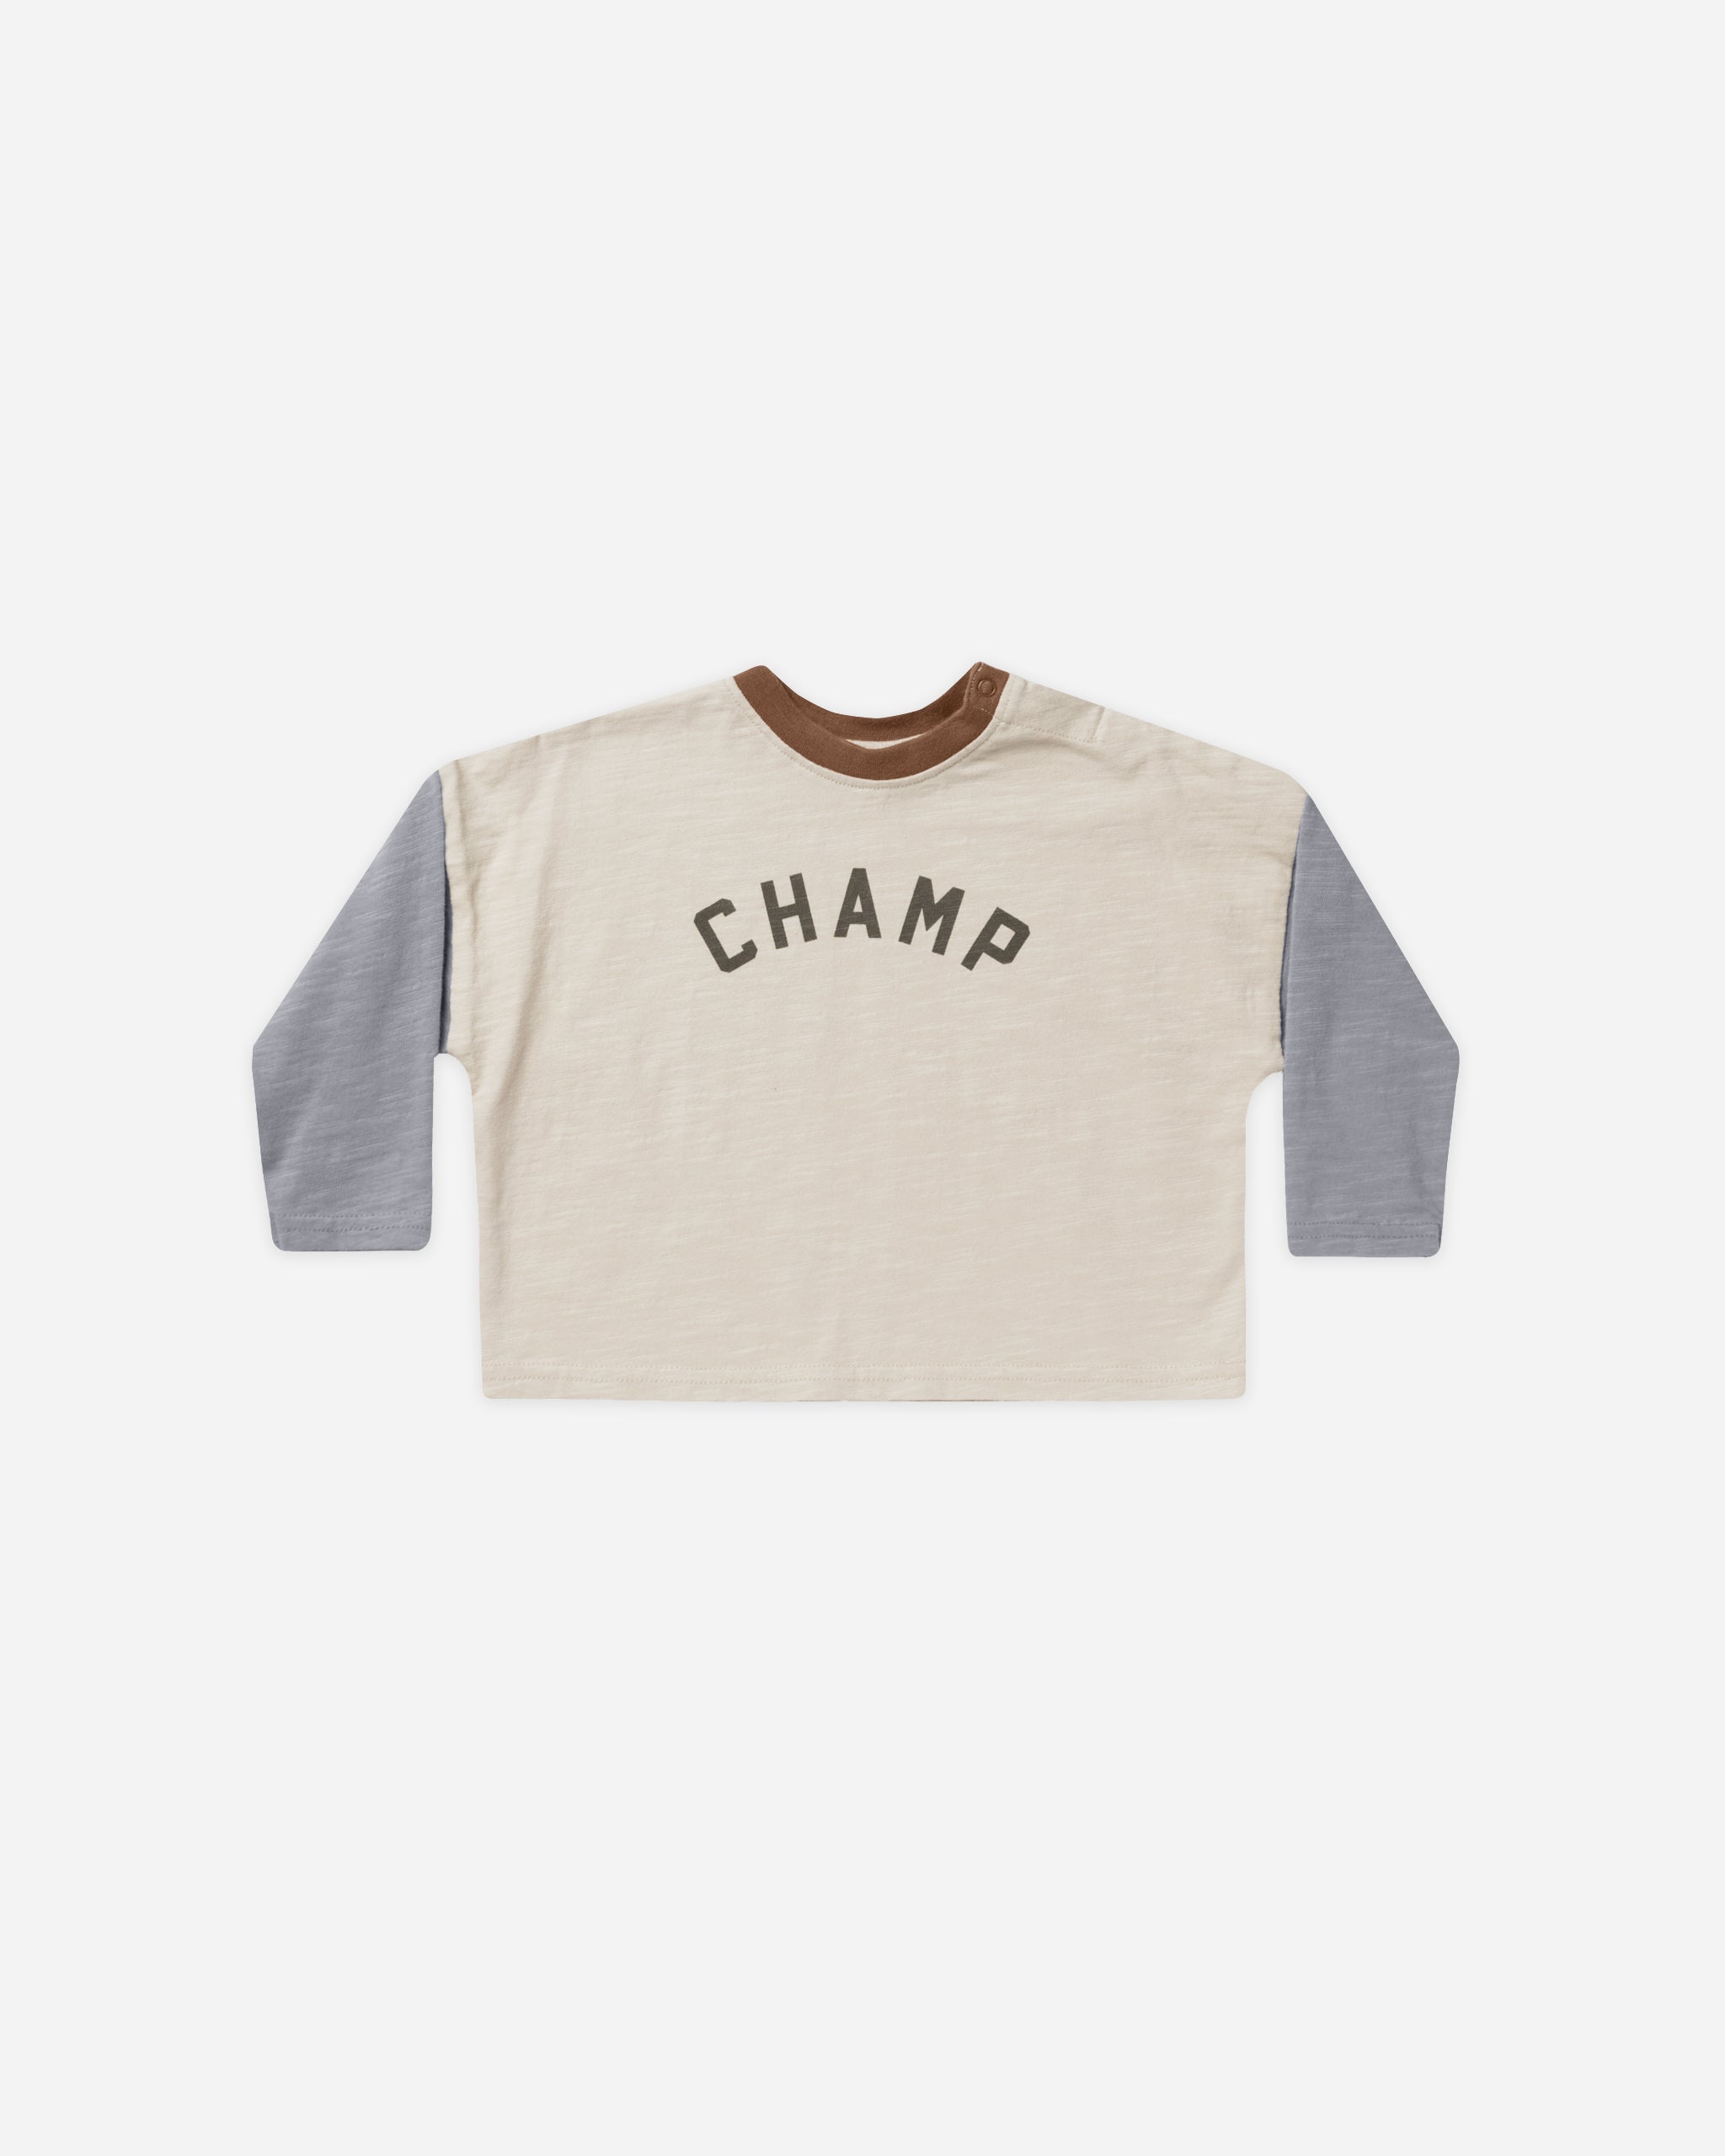 Camden Long Sleeve Tee || Champ - Rylee + Cru | Kids Clothes | Trendy Baby Clothes | Modern Infant Outfits |